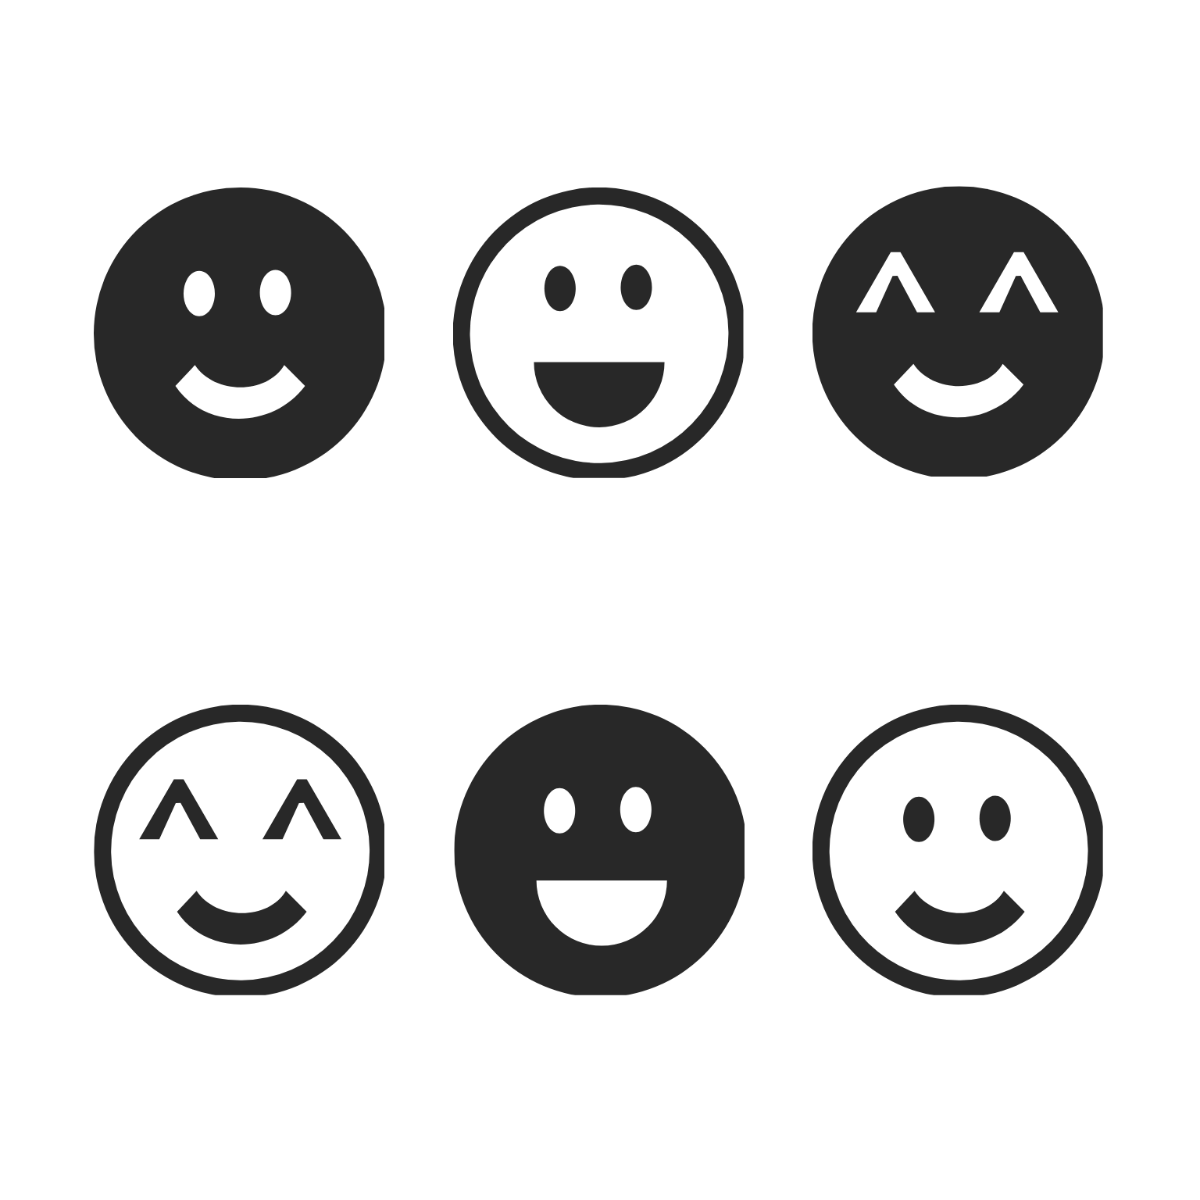 Free Black and White Smiley Face Vector Template